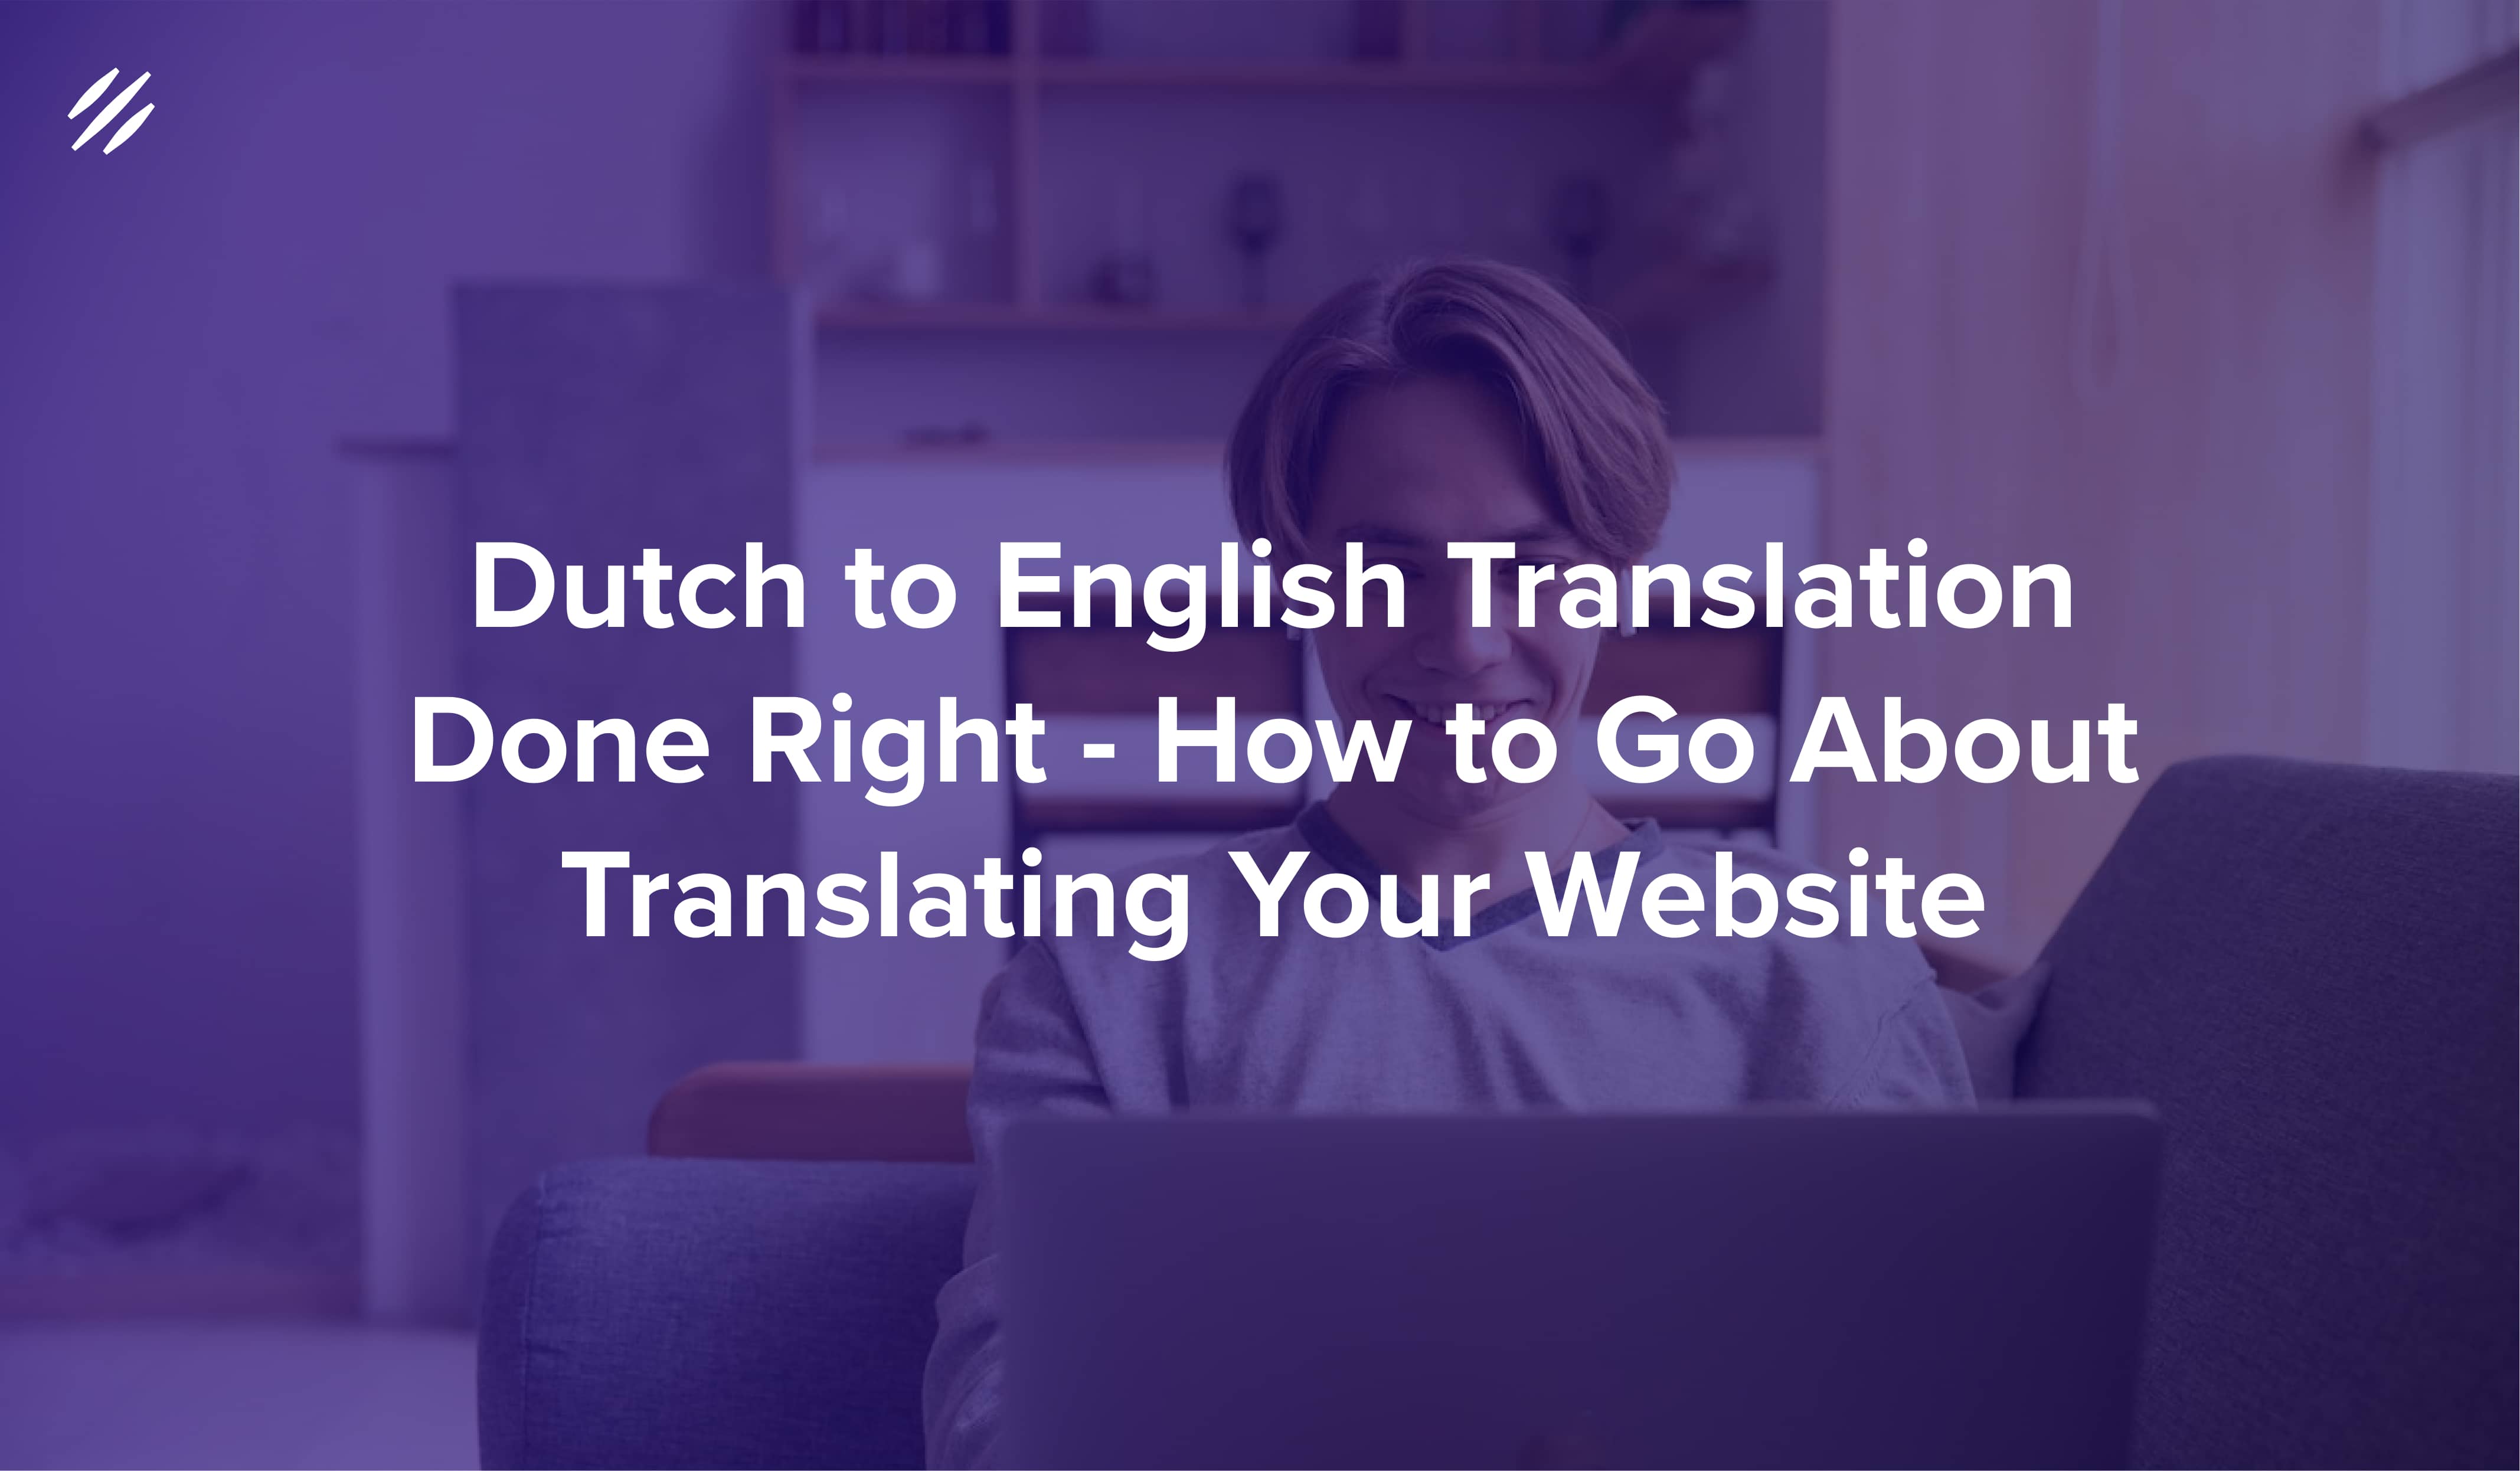 Dutch to English Translation Done Right — How to go about translating your content & website